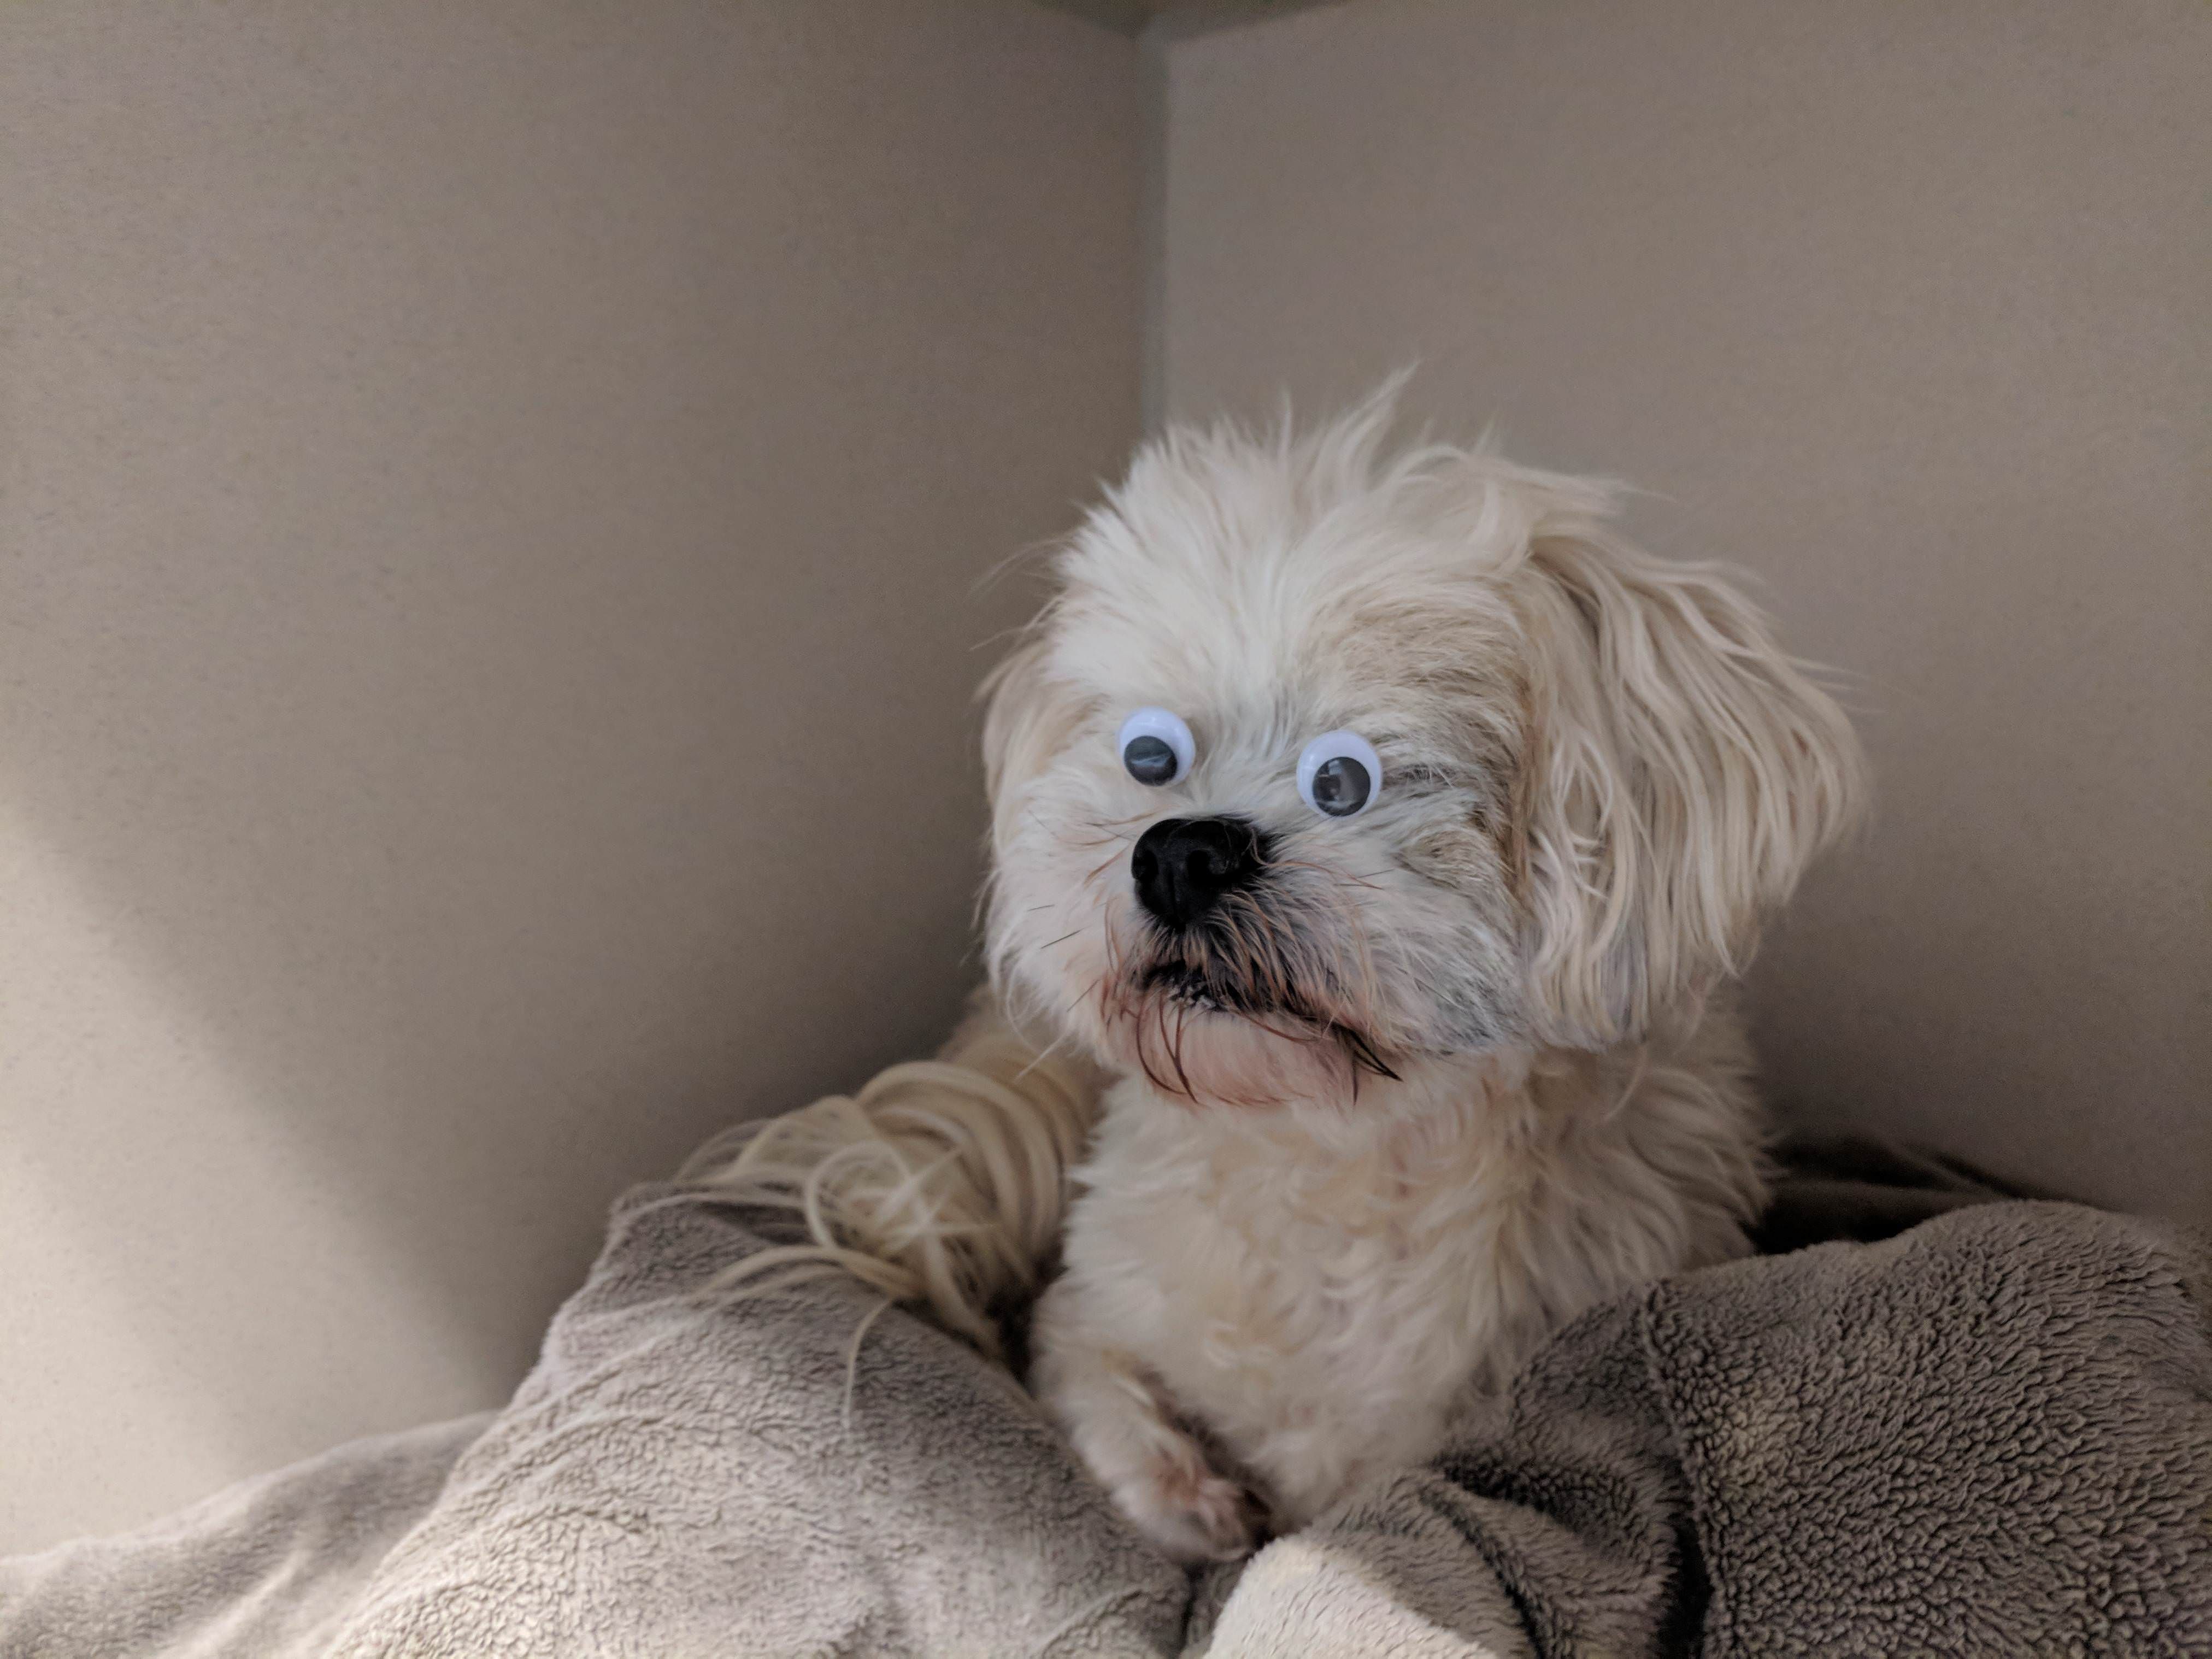 This is Lewis. He belongs to a co-worker of mine. He is blind. She brought him into work today and said "he wanted to be a seeing eye dog for Halloween"